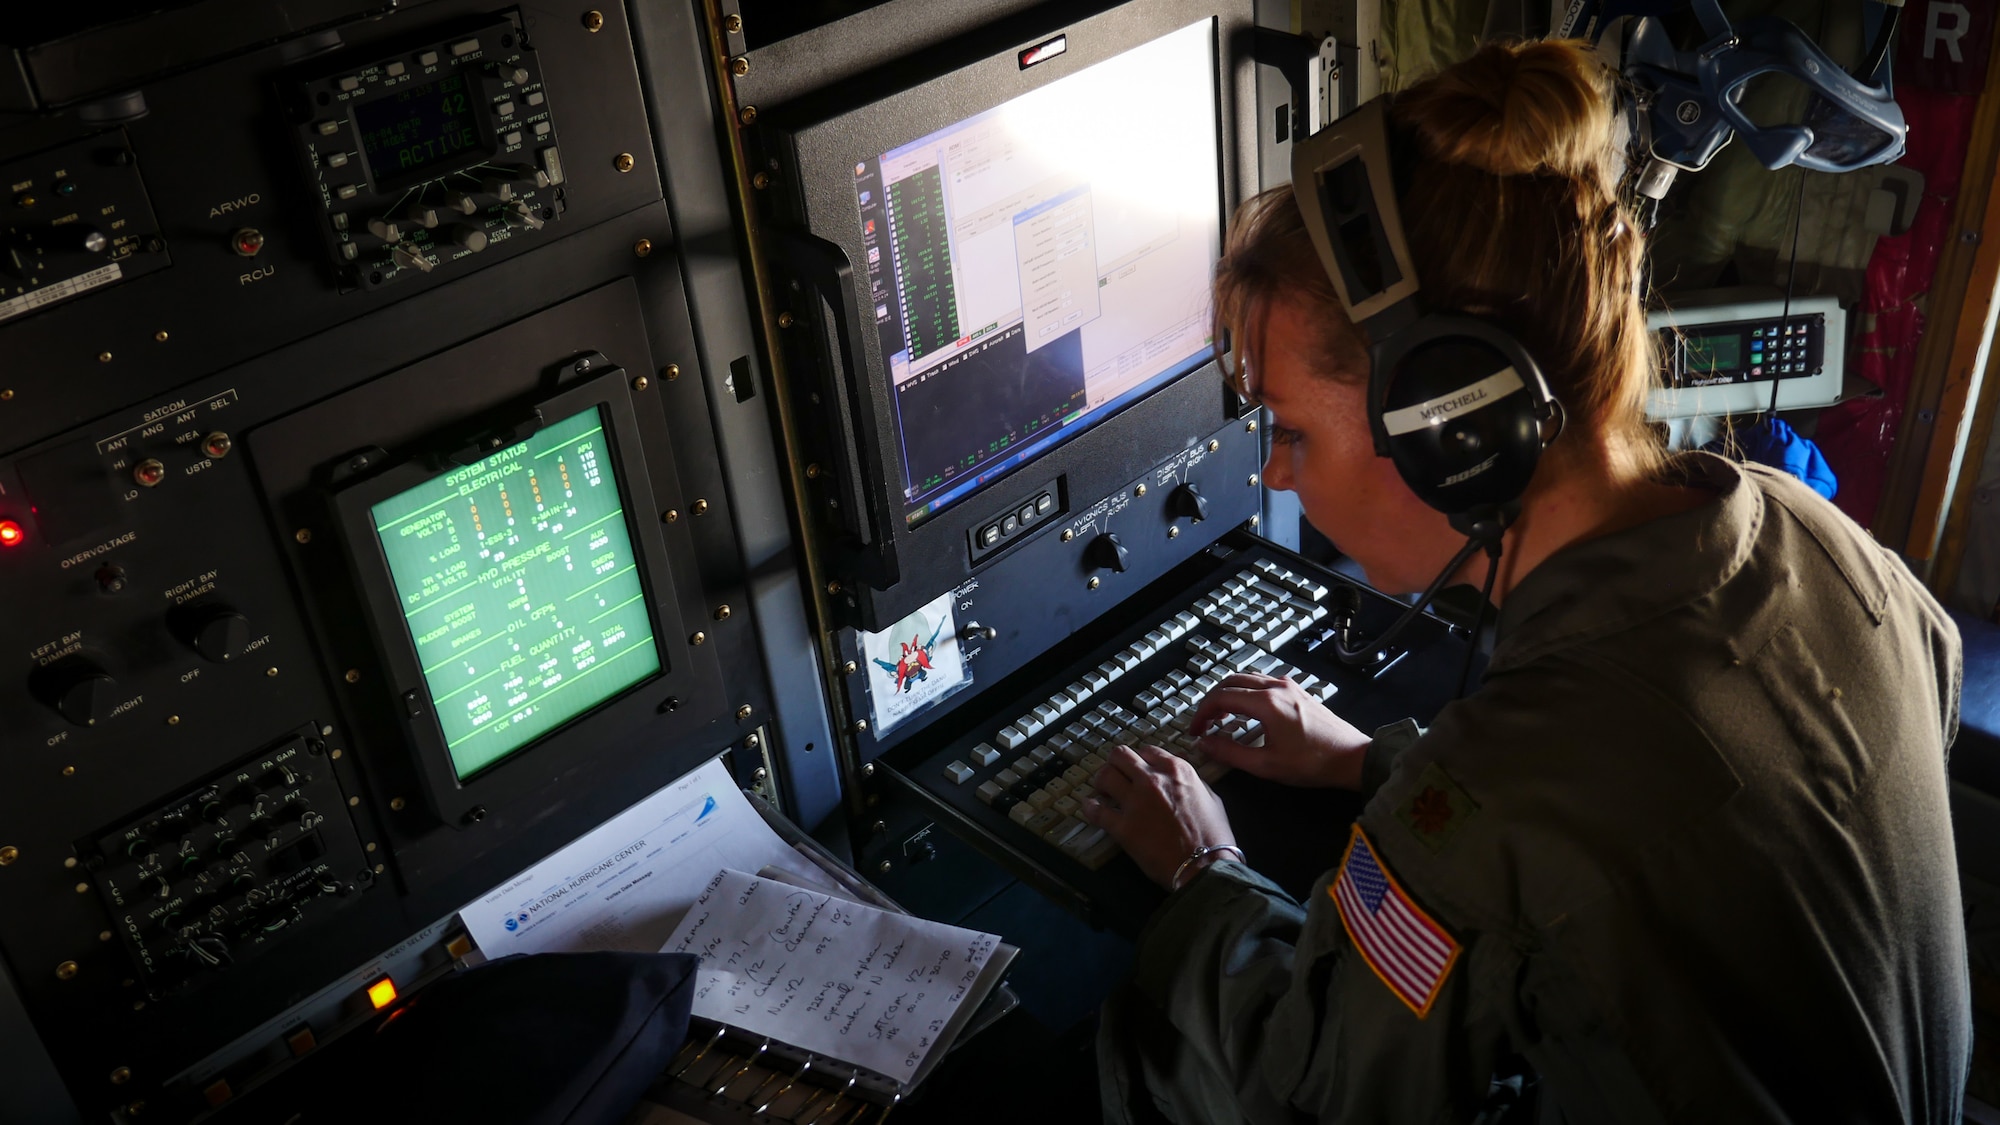 Air Force Reserve Maj. Nicole Mitchell, aerial reconnaissance weather officer, 53rd Weather Reconnaissance Squadron, Keesler Air Force Base, Mississippi, records weather information while flying into Hurricane Irma, Sep. 8, 2017. The Air Force Reserve 53rd Weather Reconnaissance Squadron "Hurricane Hunters" fly WC-130J Super Hercules though the eye of active hurricanes to collect weather data using aircraft and externally dropped sensors to provide accurate weather data to the National Hurricane Center on approaching hurricanes. The Reserve Citizen Airmen provide 100 percent of the Air Force capability in low-level, real time data collection in Atlantic and Pacific Ocean tropical weather systems. (U.S. Air Force photo by Staff Sgt. Corban Lundborg)